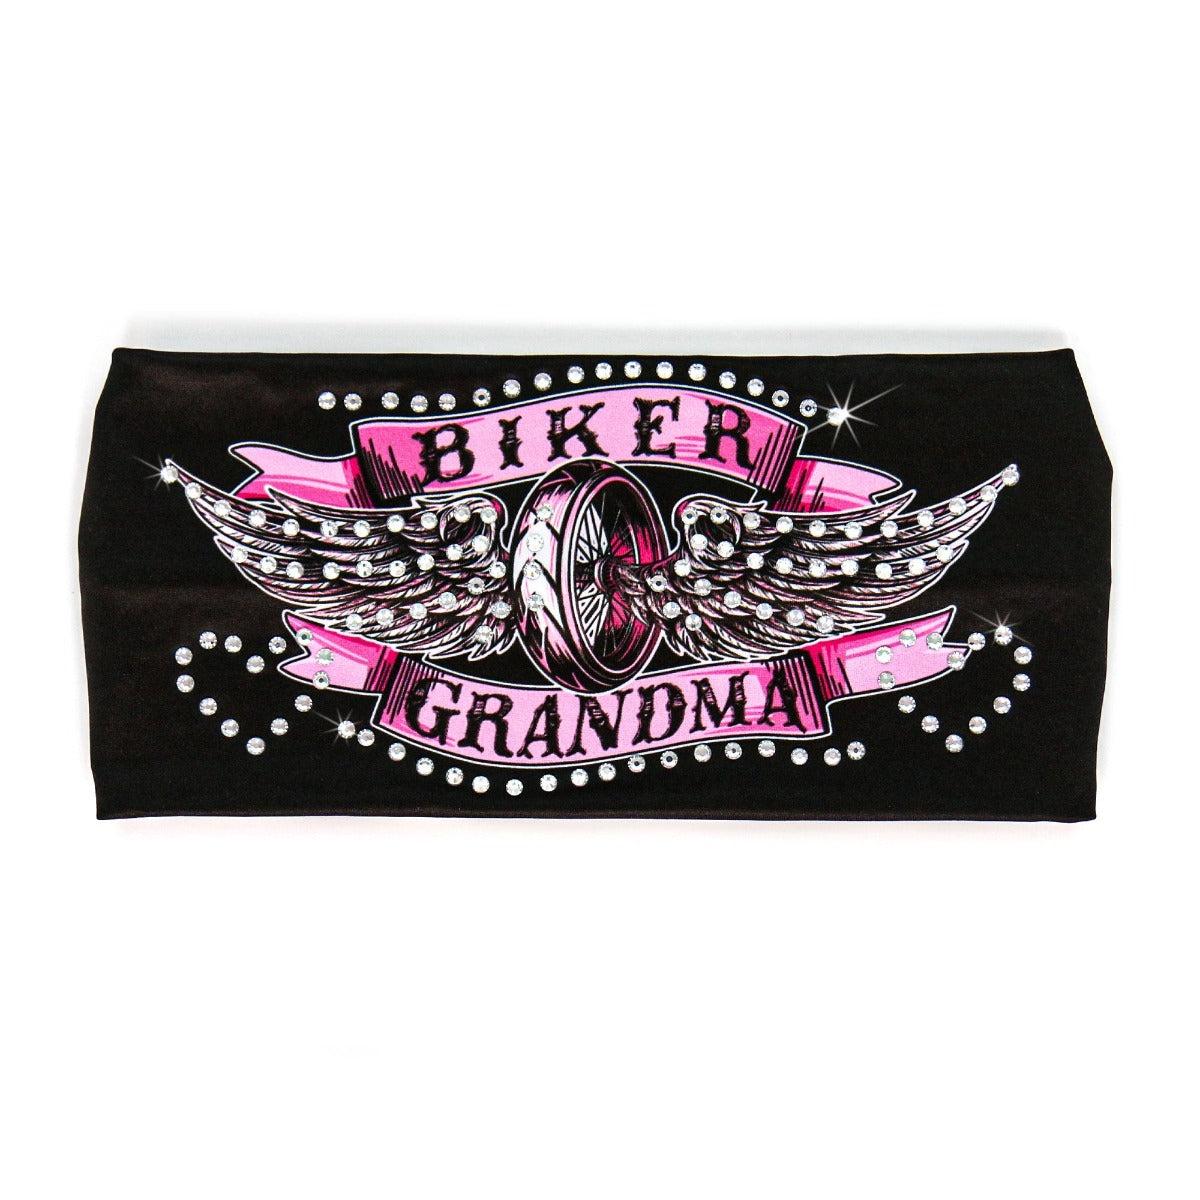 Sparkling Hot Leathers Biker Grandma Bandana Headband Wraps adorned with rhinestone crystals for a touch of glamour and biker style.